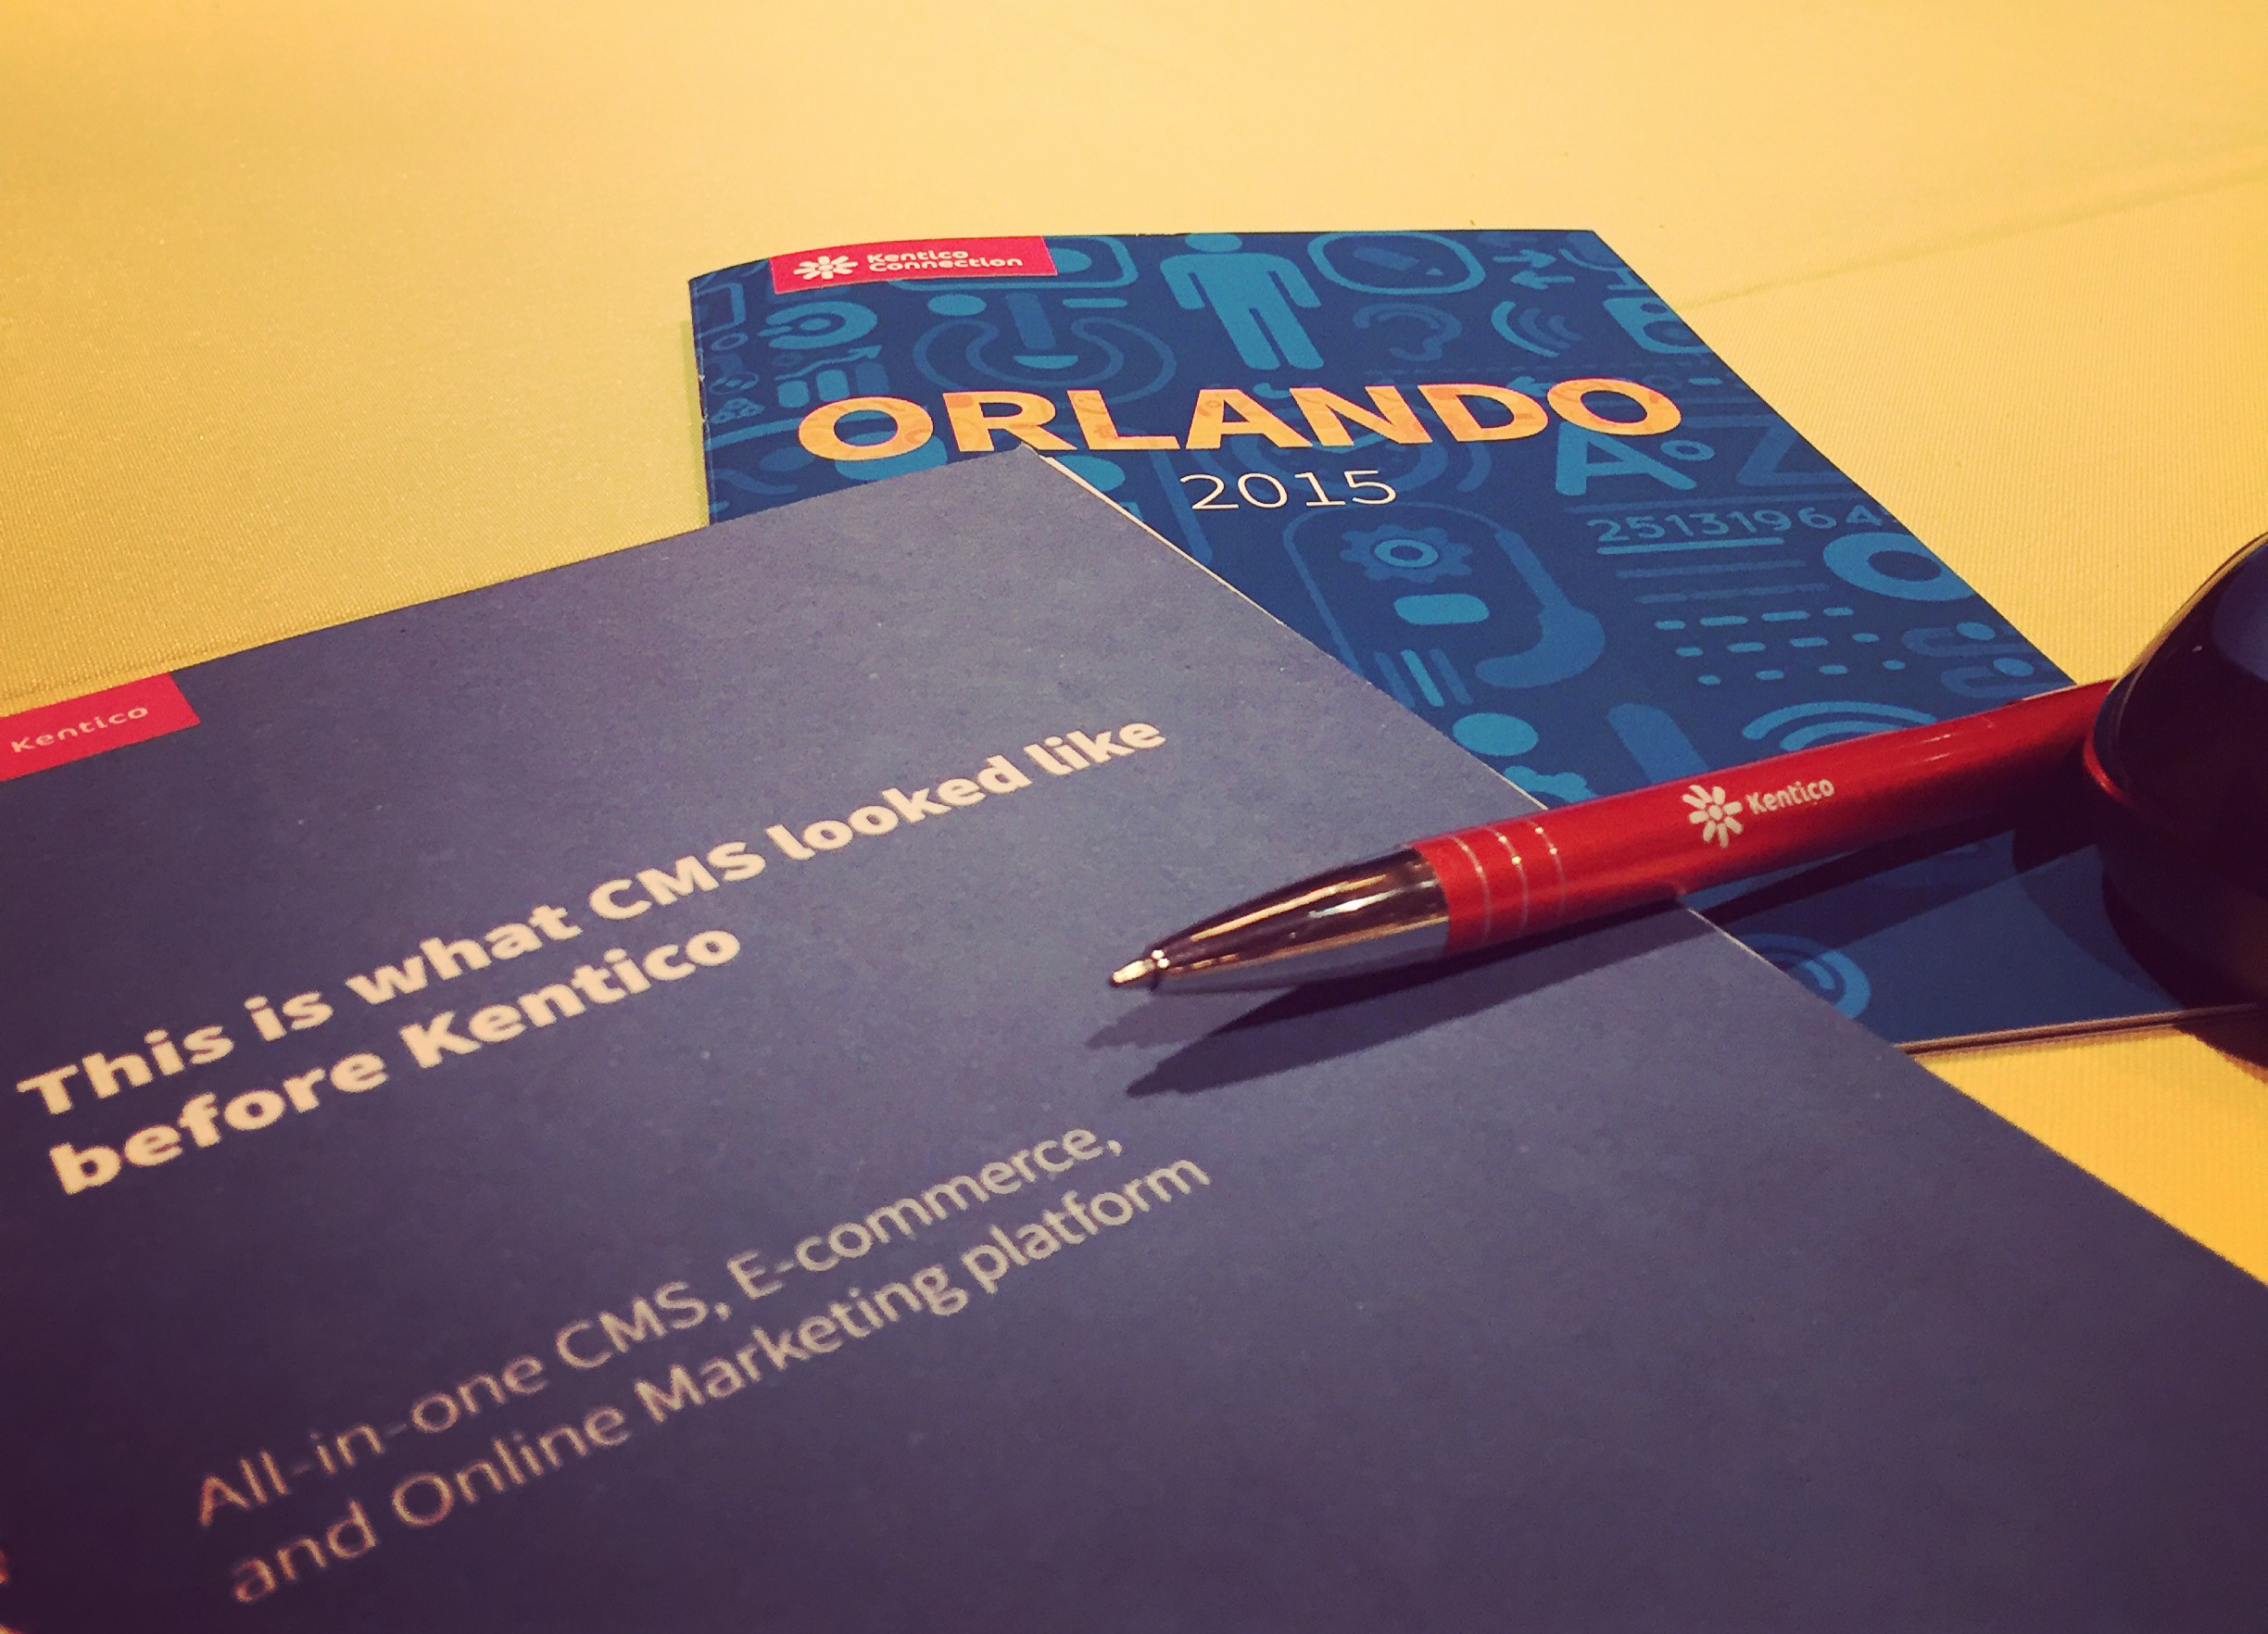 CMS and Orlando 2015 booklets